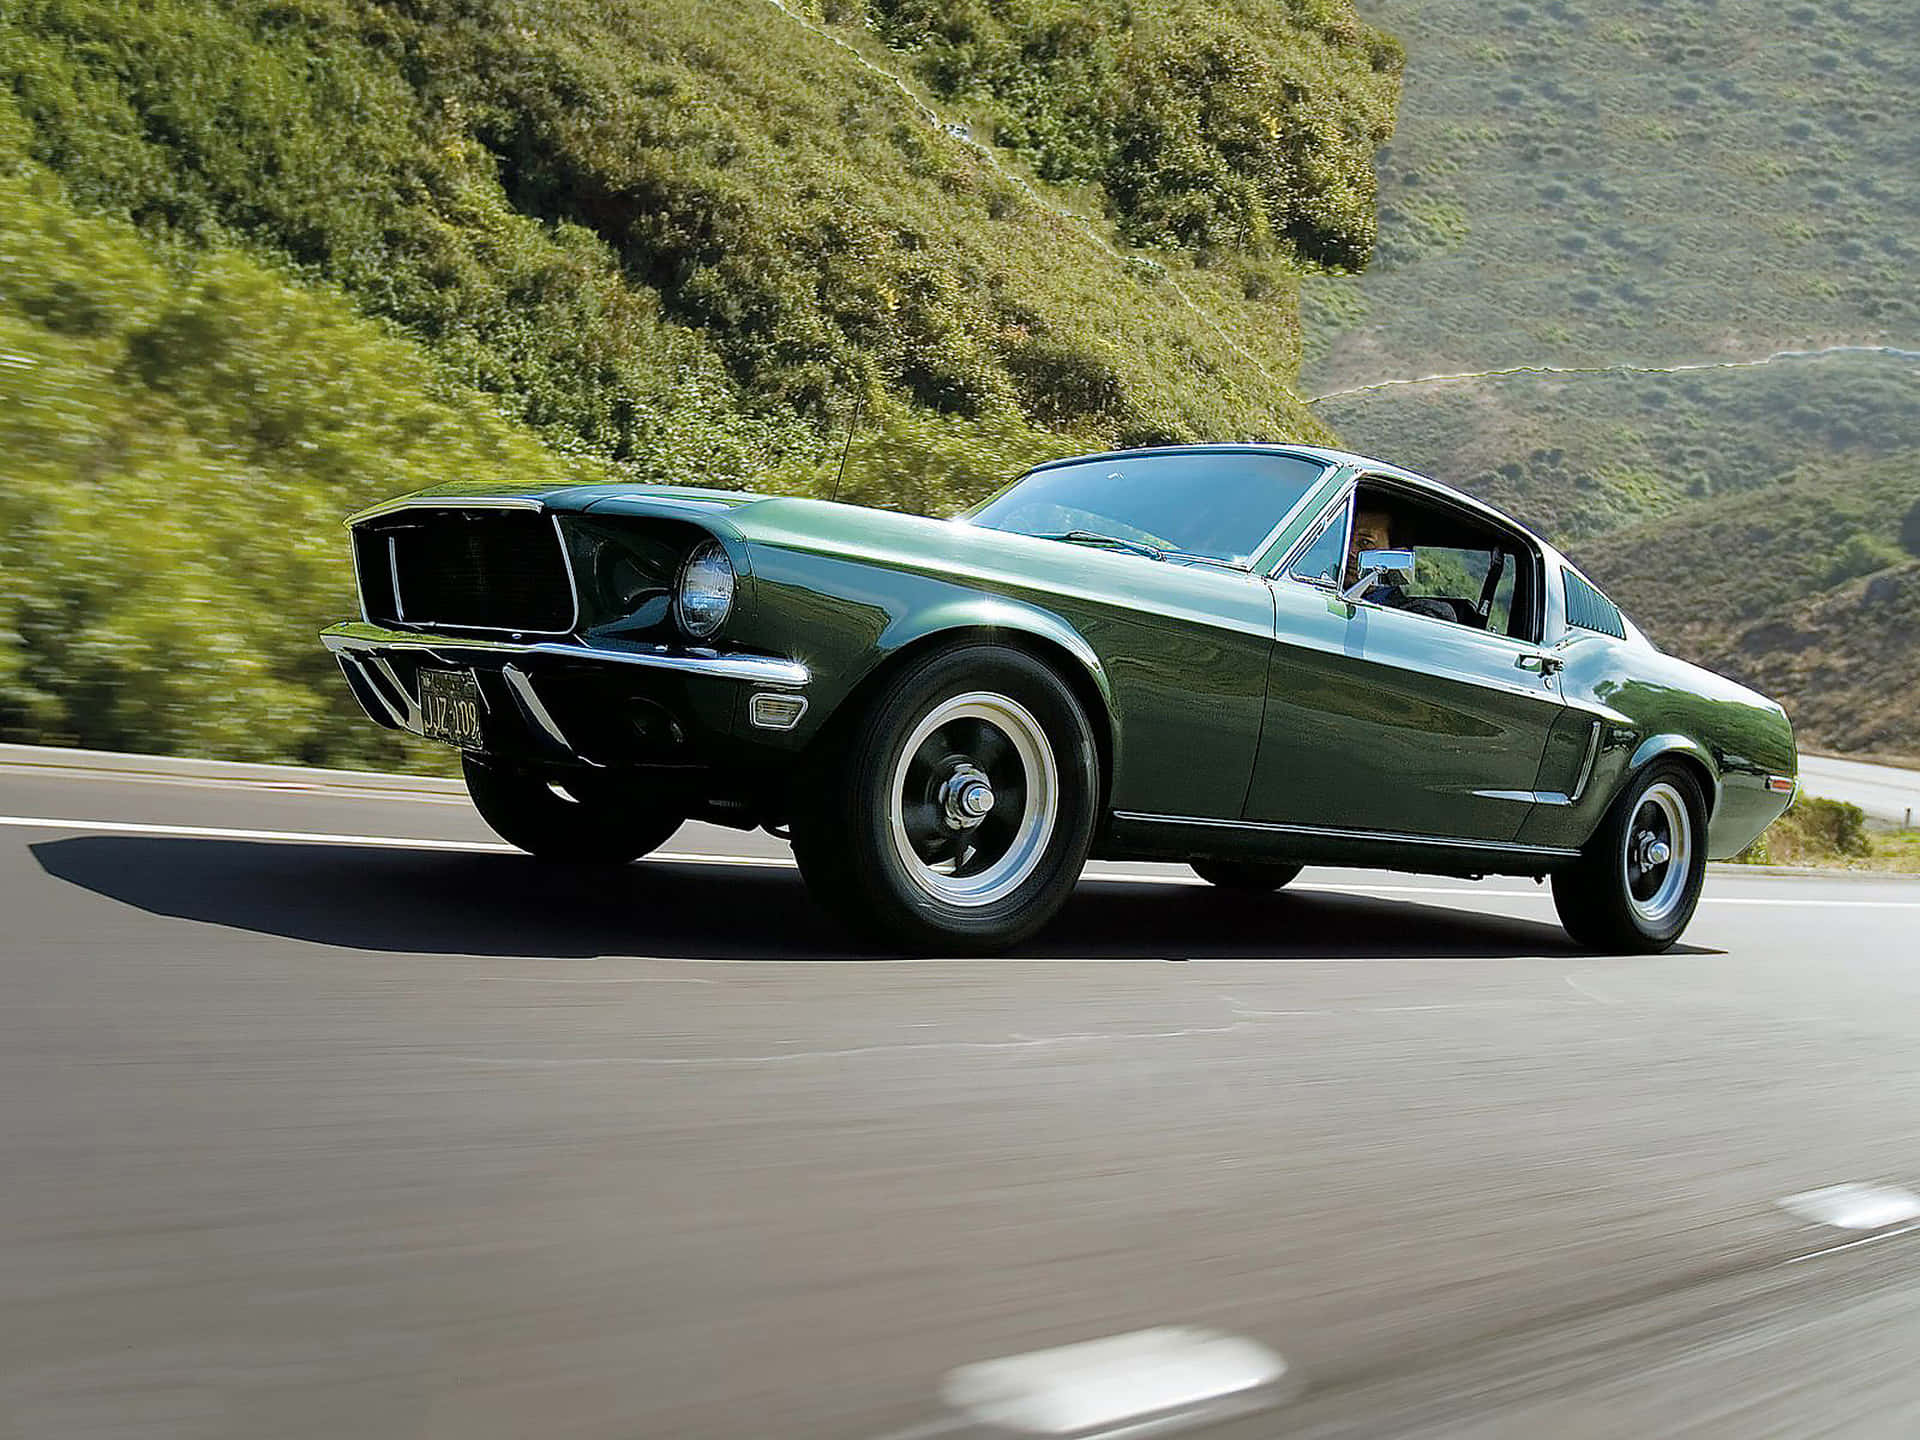 Ford Mustang 1968 Gt Fastback Muscle Car Wallpaper